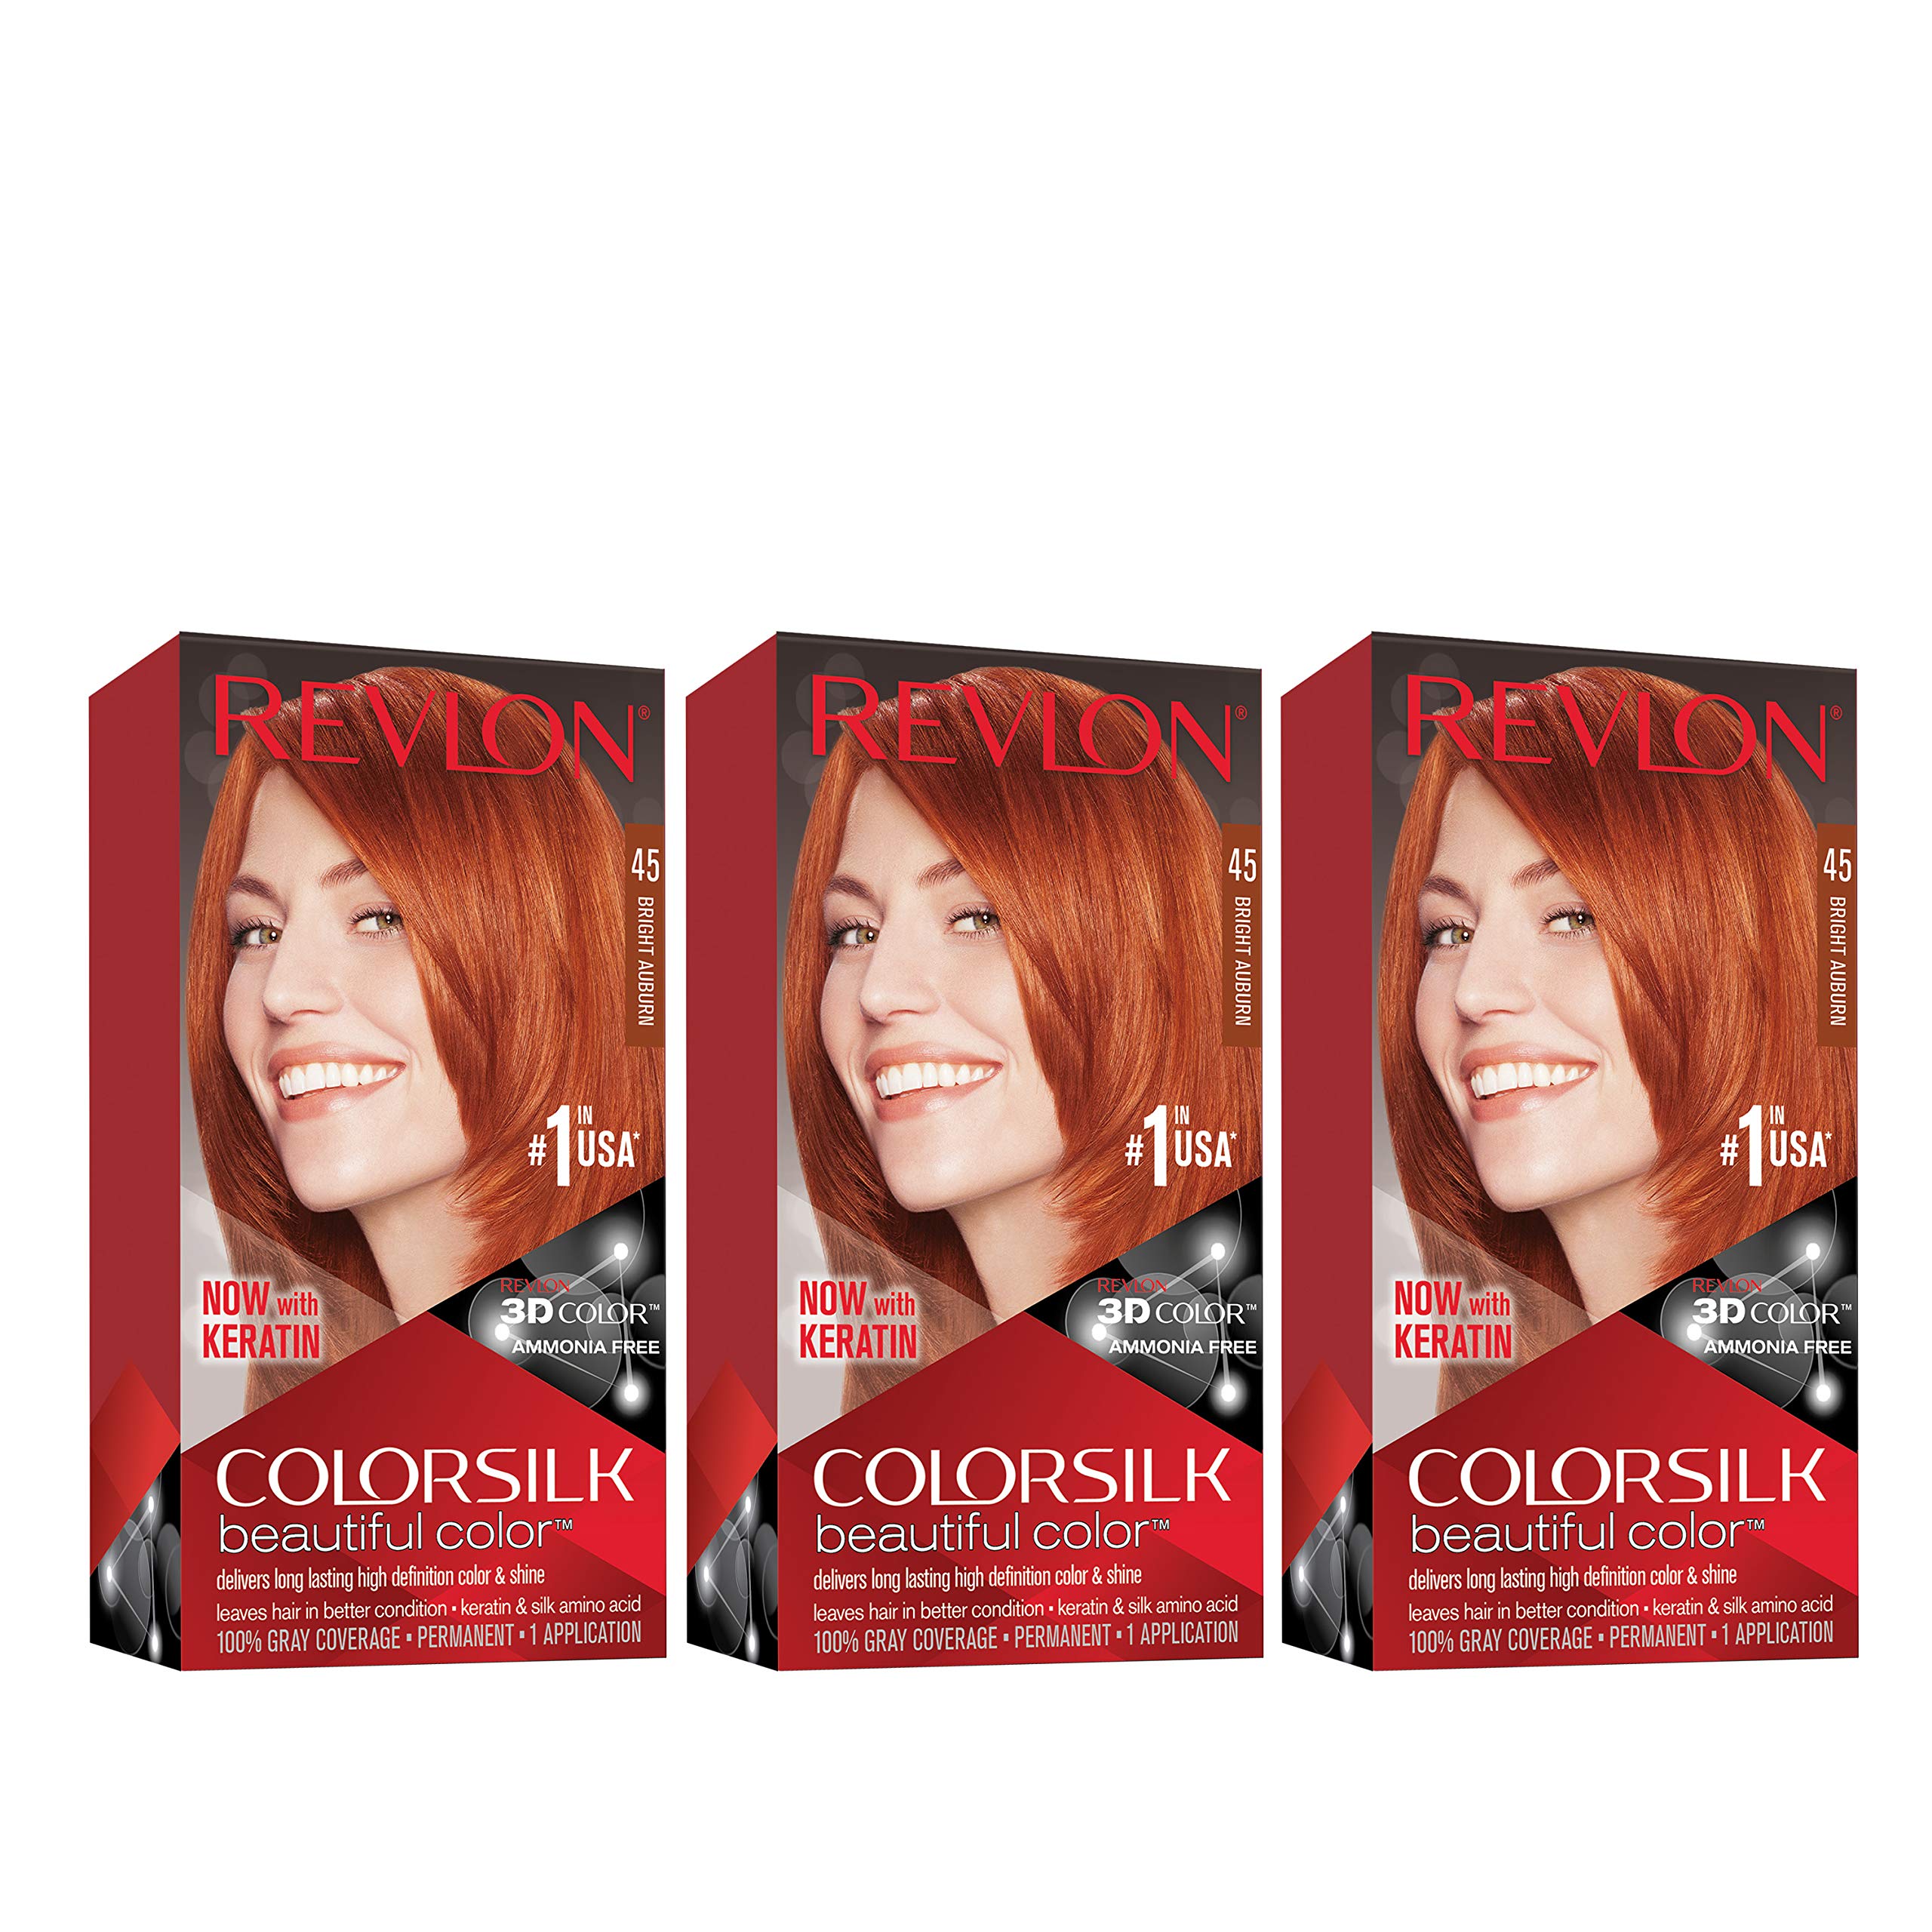 Permanent Hair Color by Revlon, Permanent Hair Dye, Colorsilk with 100% Gray Coverage, Ammonia-Free, Keratin and Amino Acids, 45 Bright Auburn, 4.4 Oz (Pack of 3)